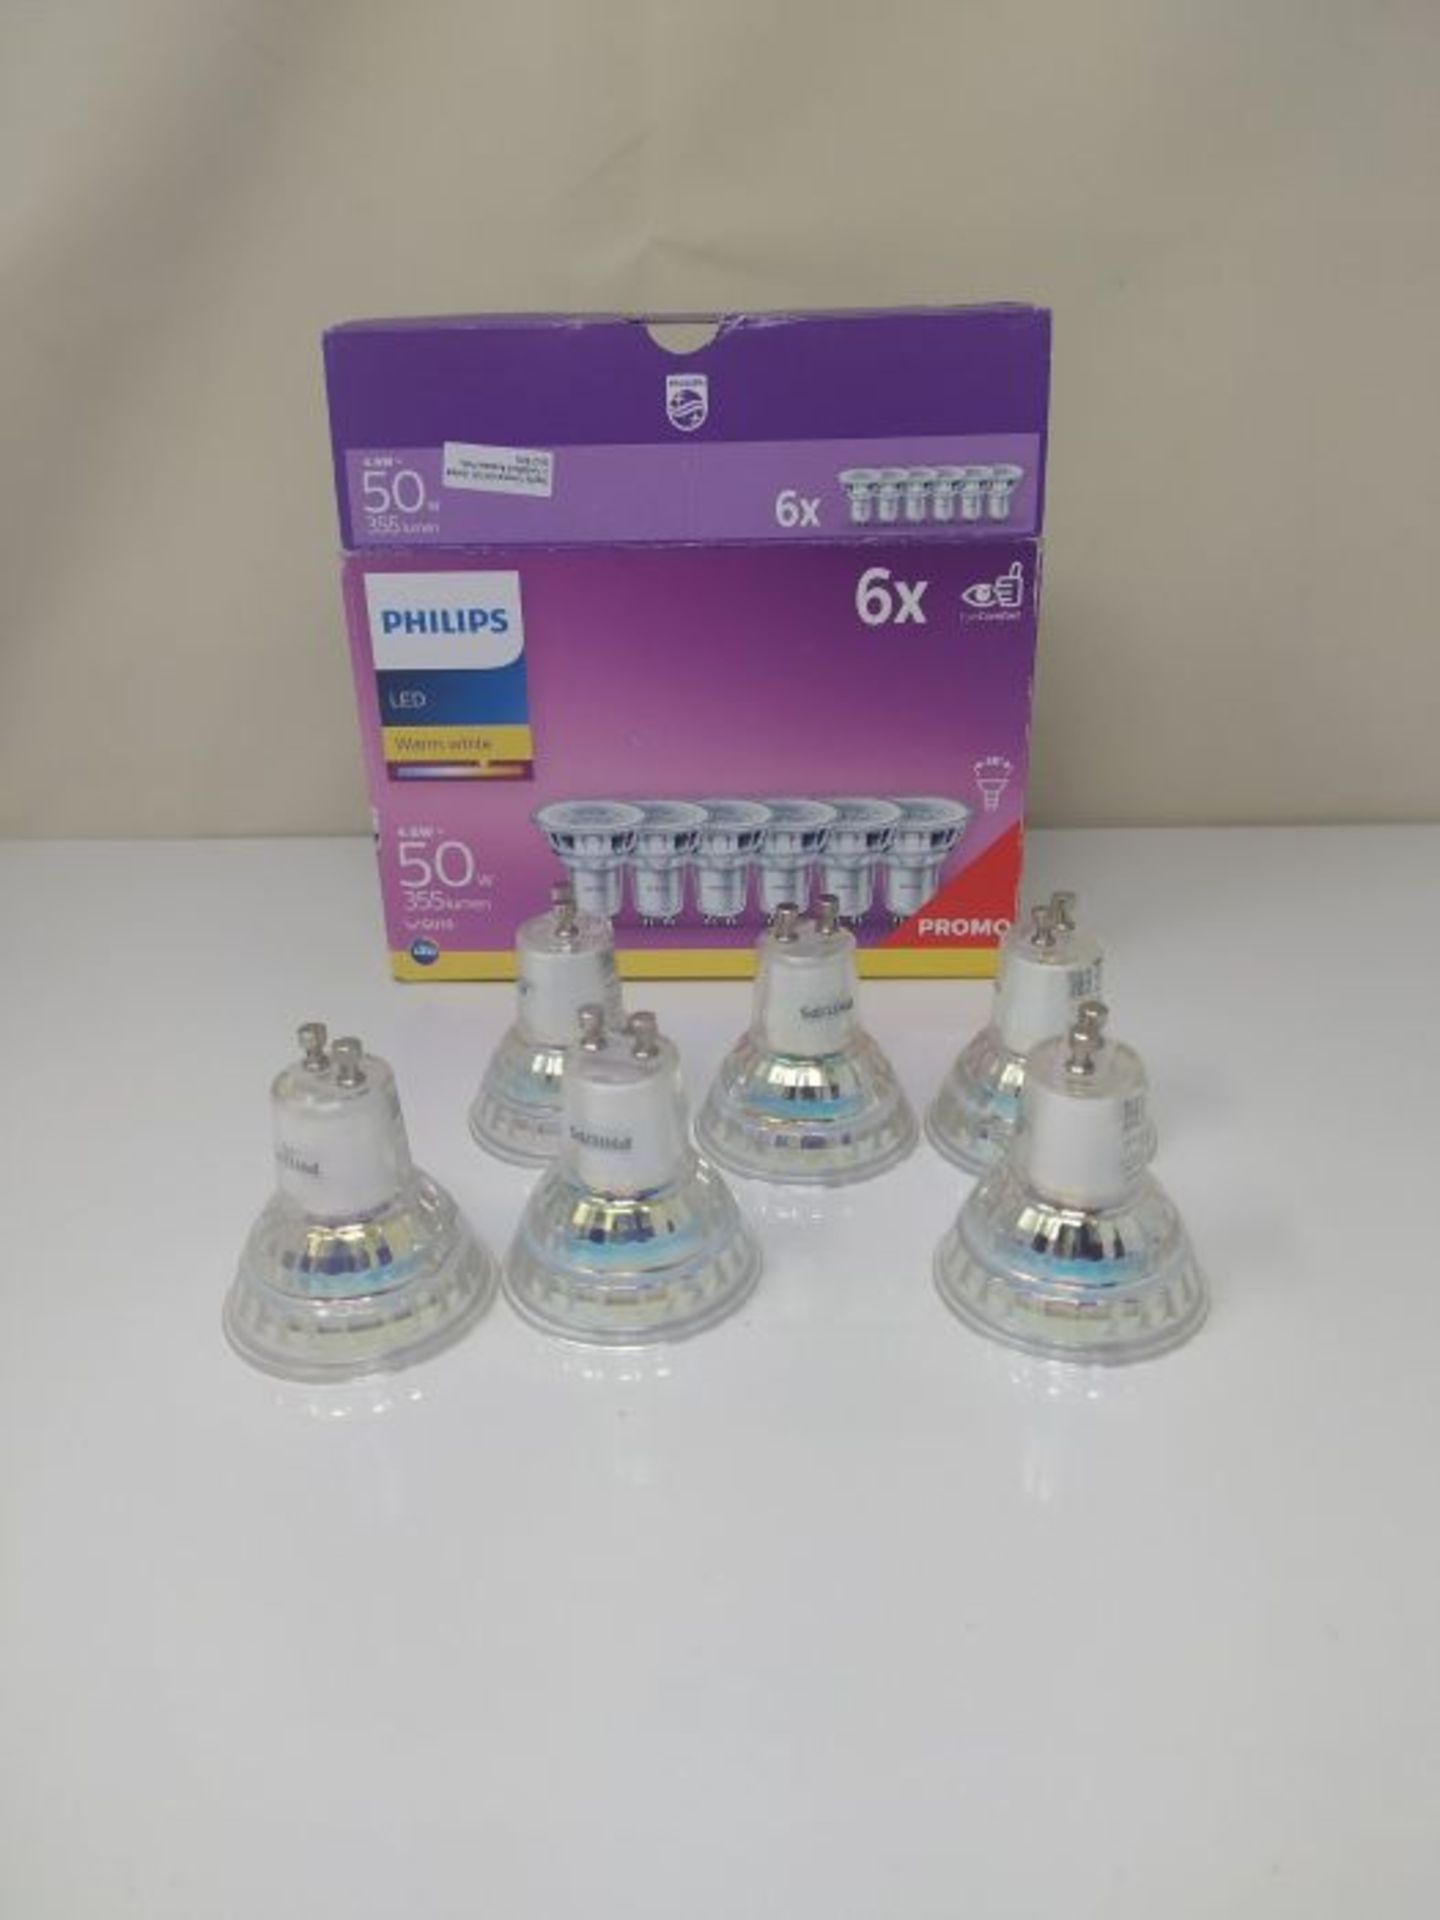 Philips LED Classic Light Bulbs, 6 Pack [GU10 Spot] 4.6 W - 50 W Equivalent, Warm Whi - Image 2 of 2